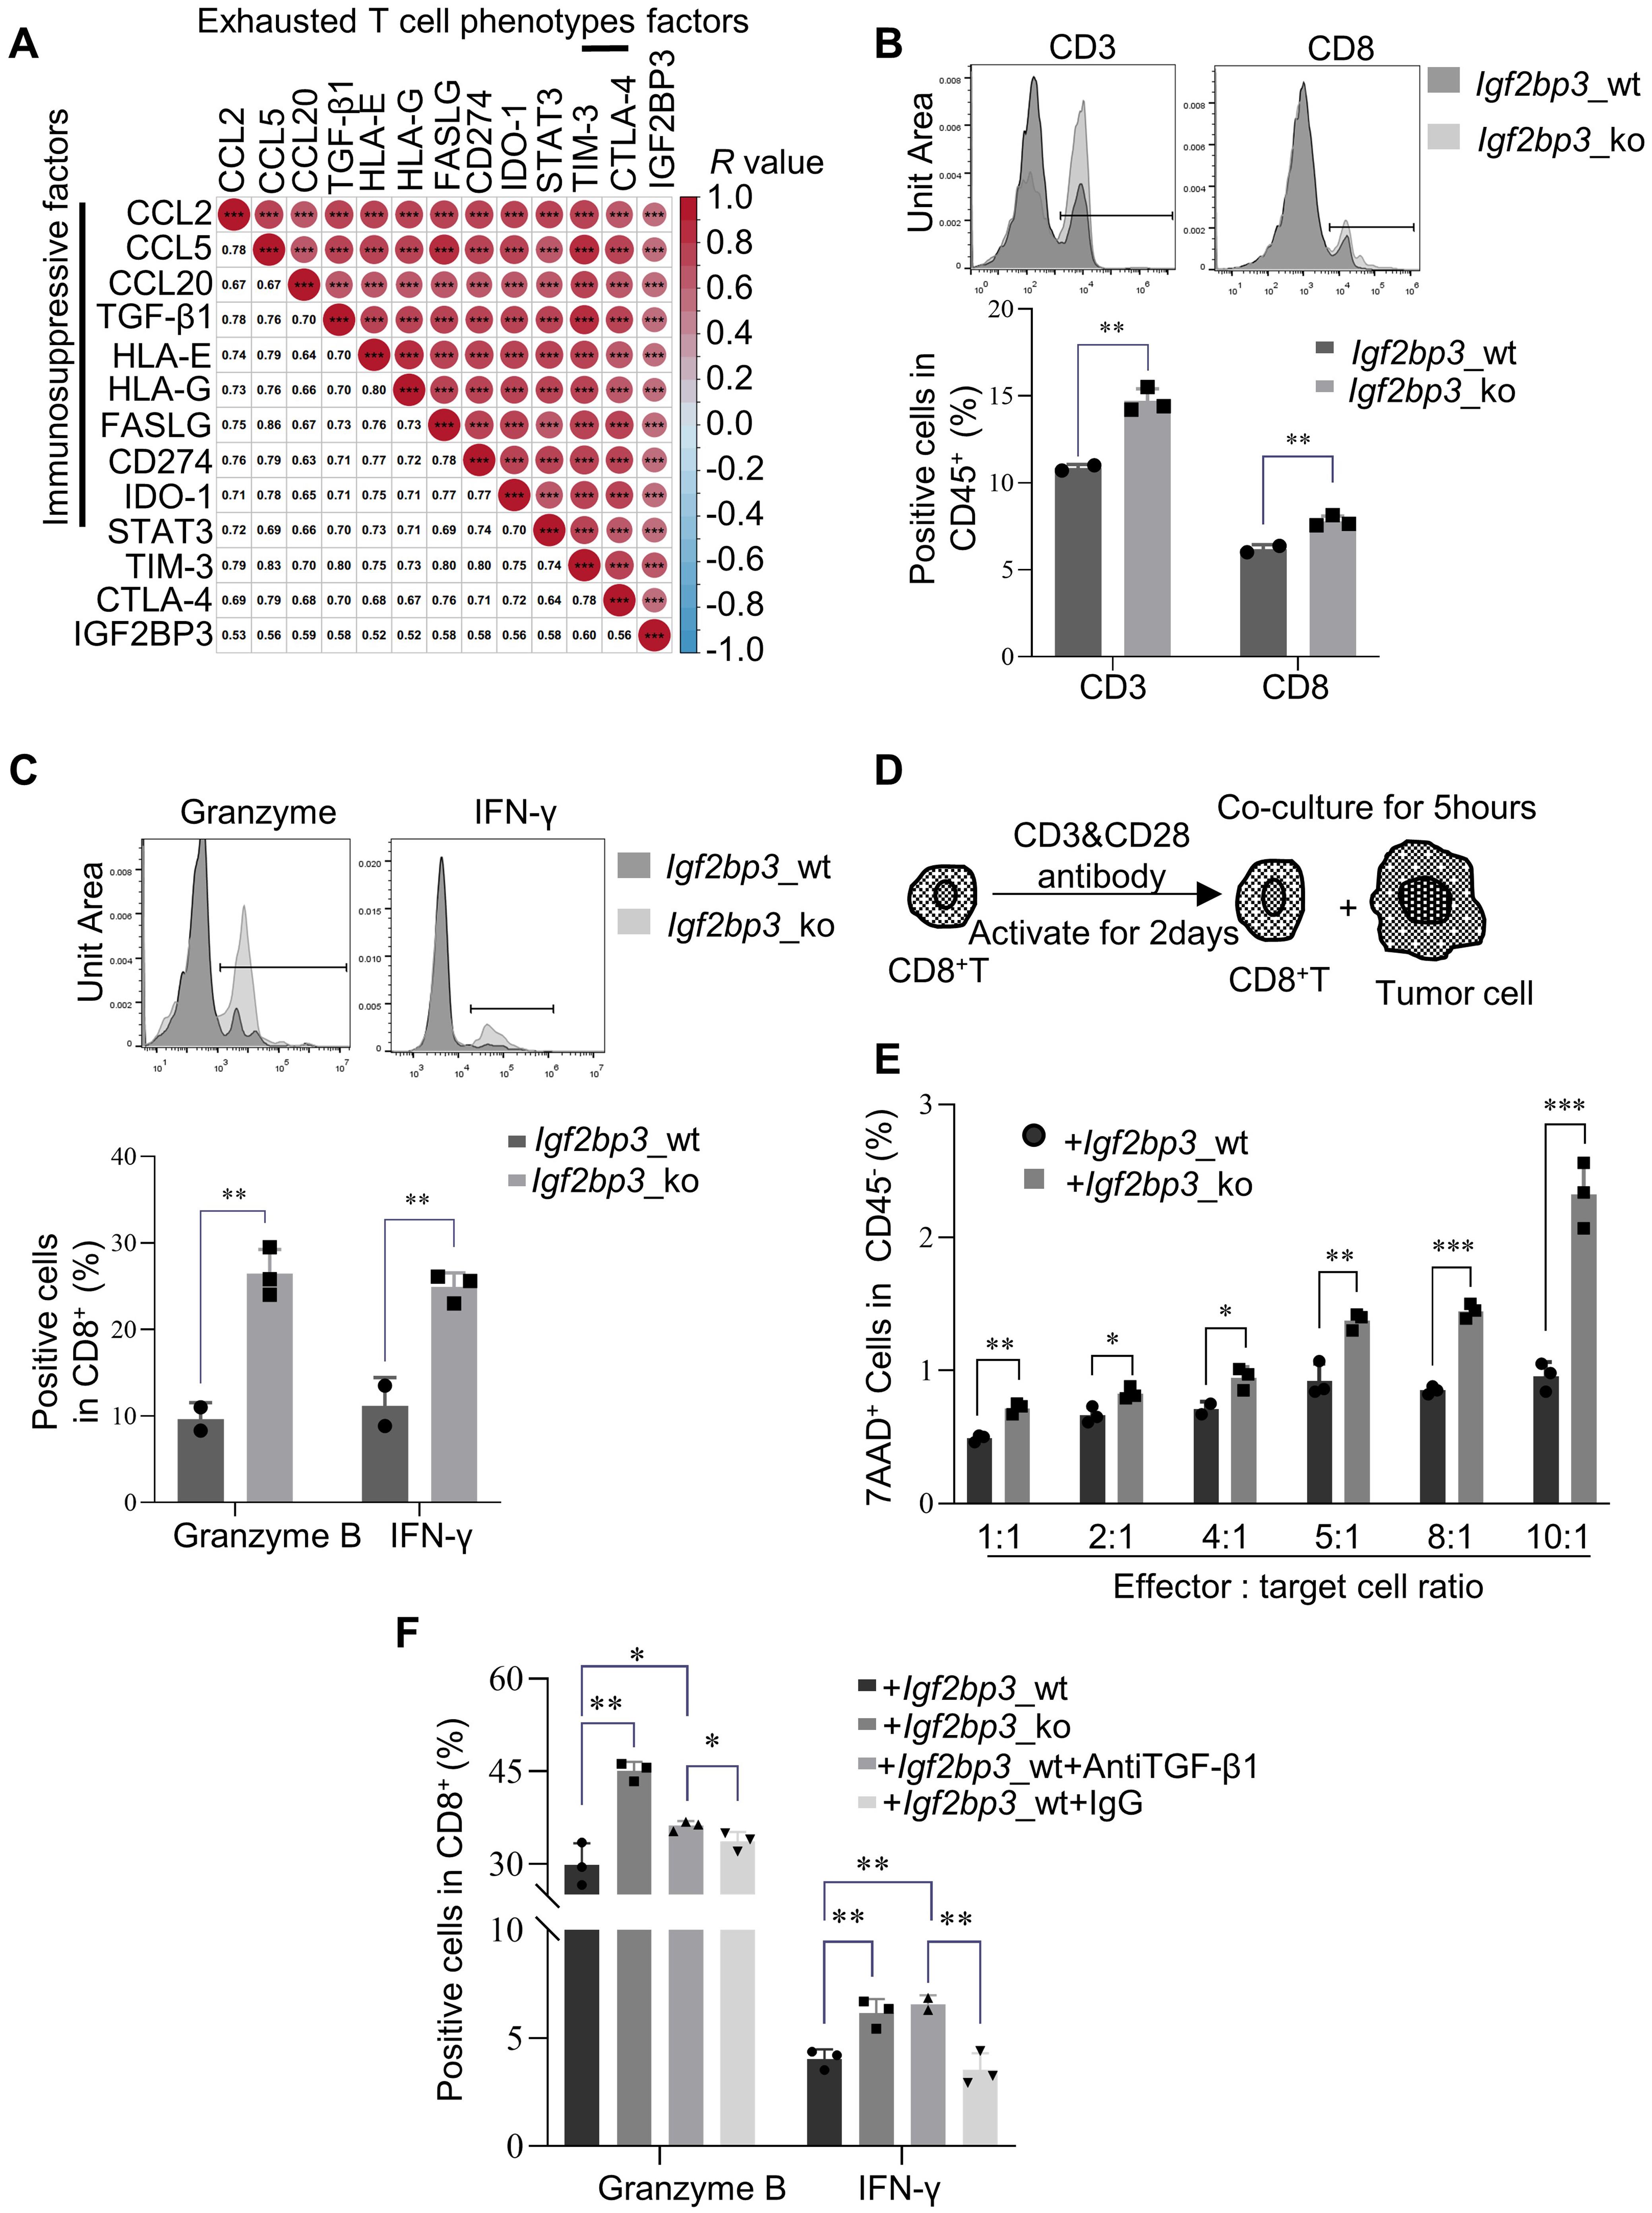 IGF2BP3 inhibits the activation of CD8<sup>+</sup> T cells by promoting the secretion of TGF-β1.